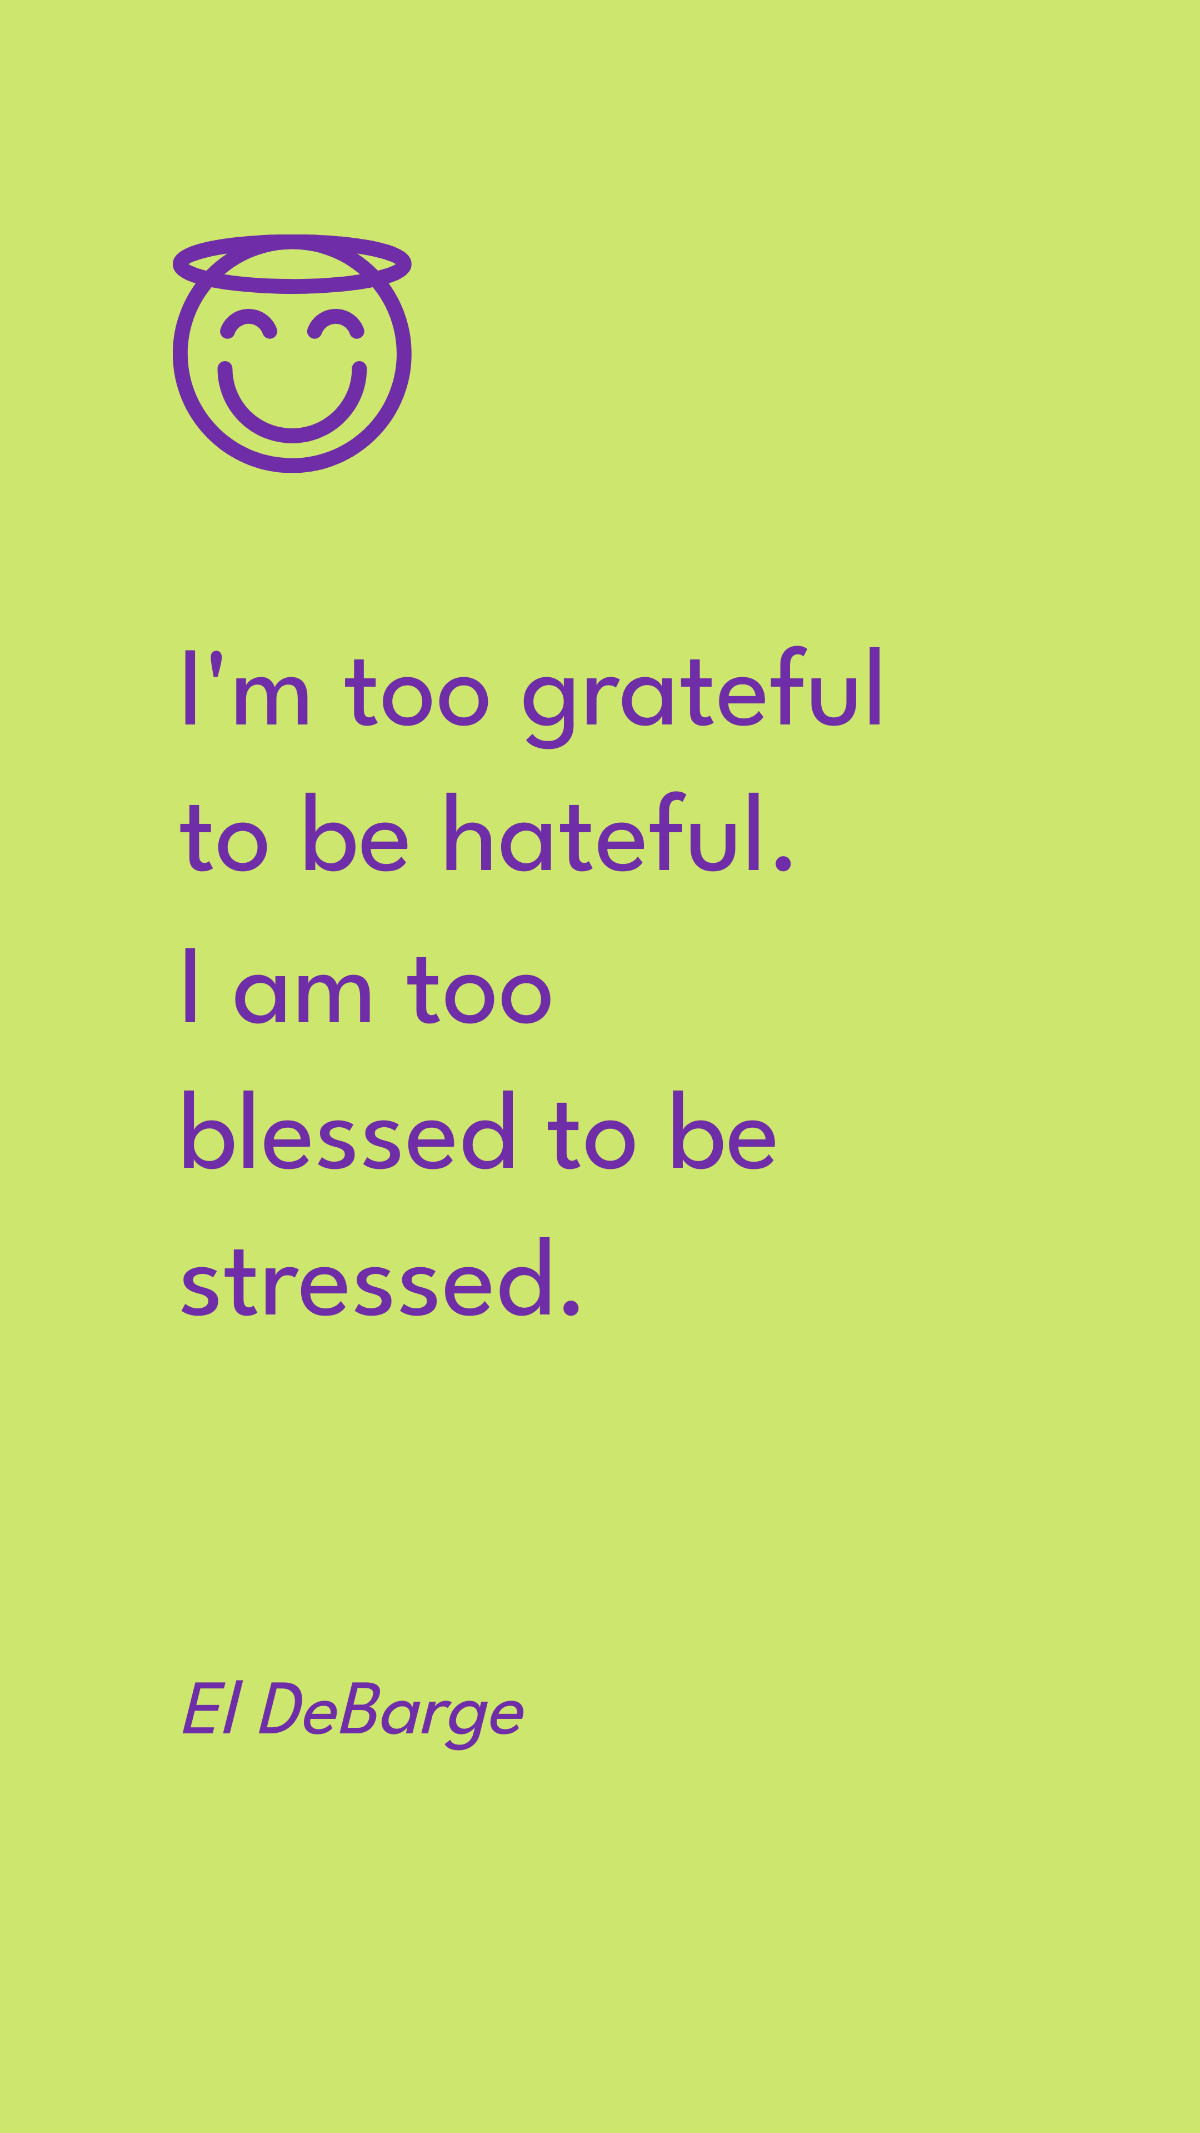 El DeBarge - I'm too grateful to be hateful. I am too blessed to be stressed.